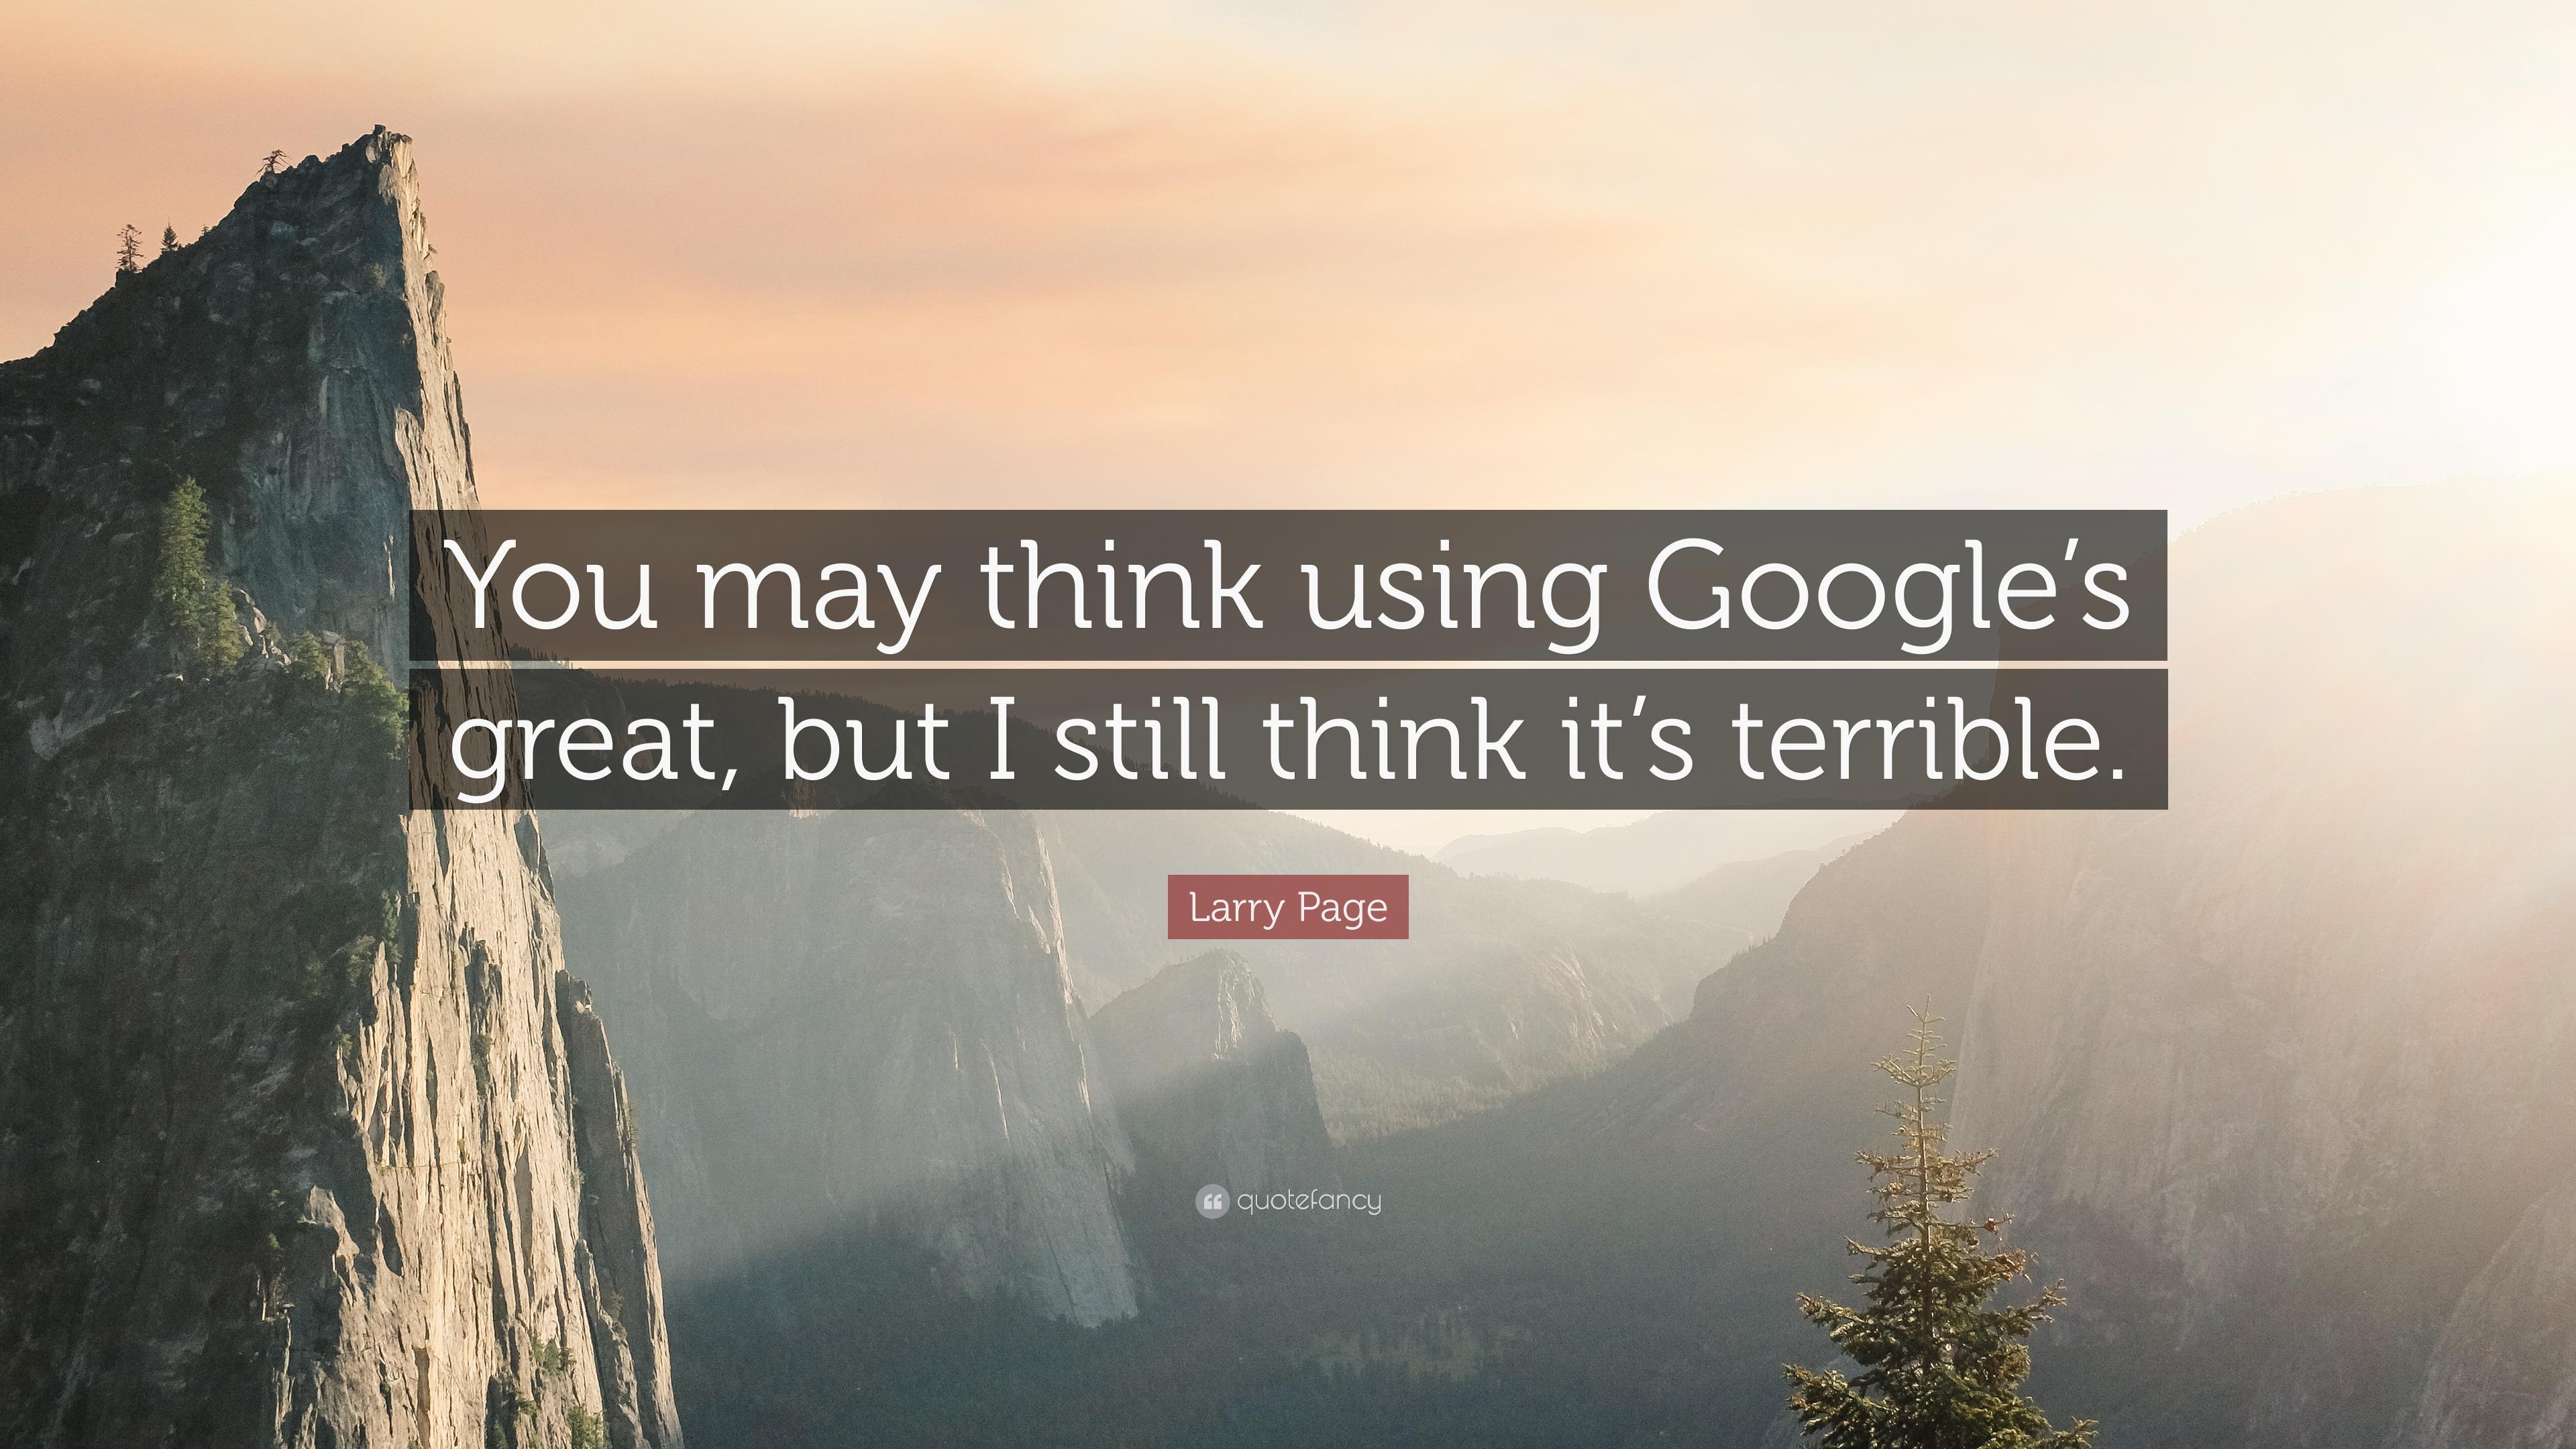 Larry Page Quote: “You may think using Google's great, but I still